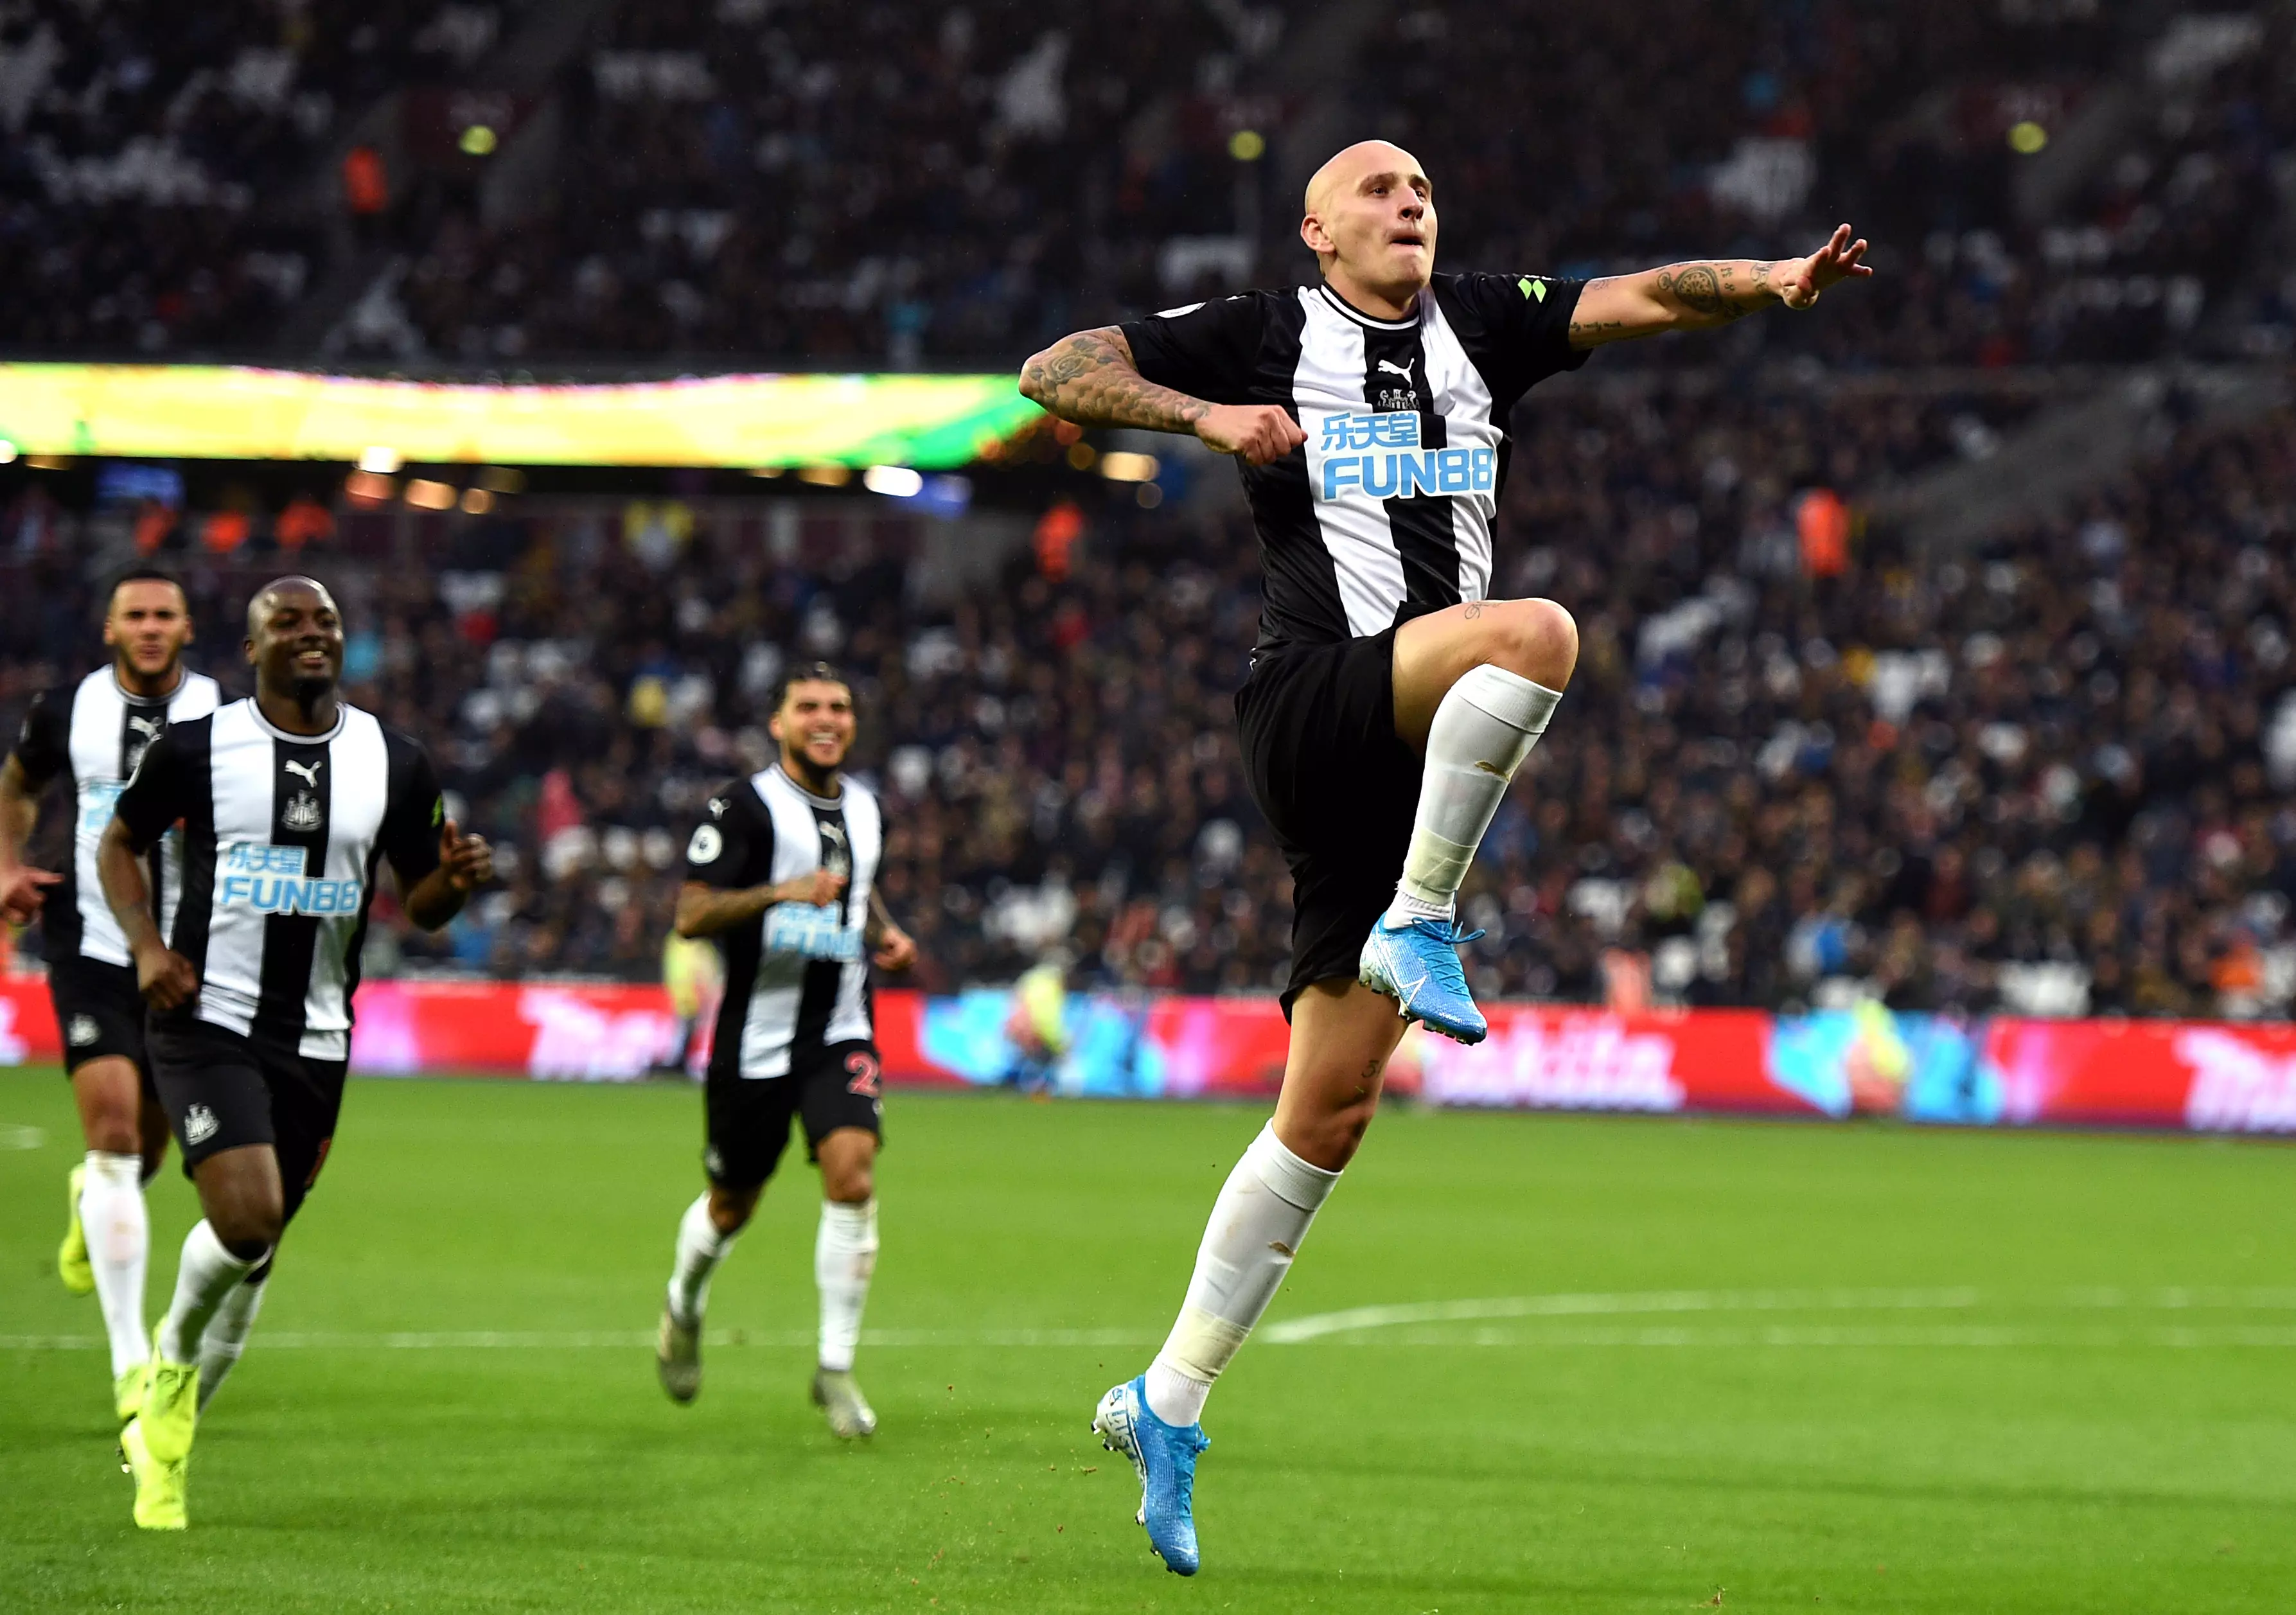 Shelvey celebrates during Newcastle's game at West Ham this season. Image: PA Images